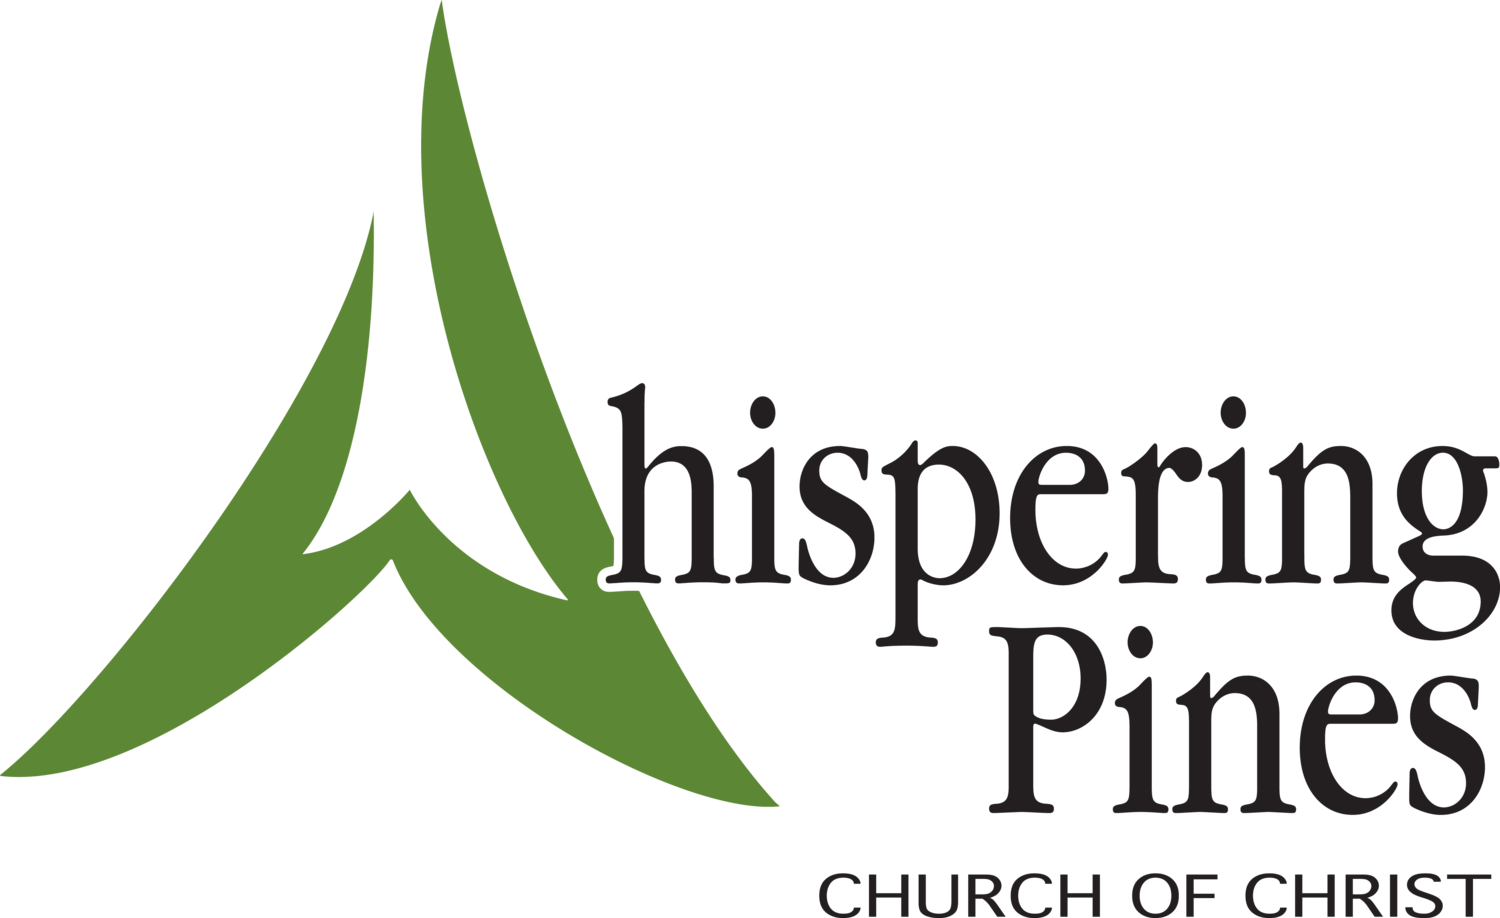 Whispering Pines Church of Christ